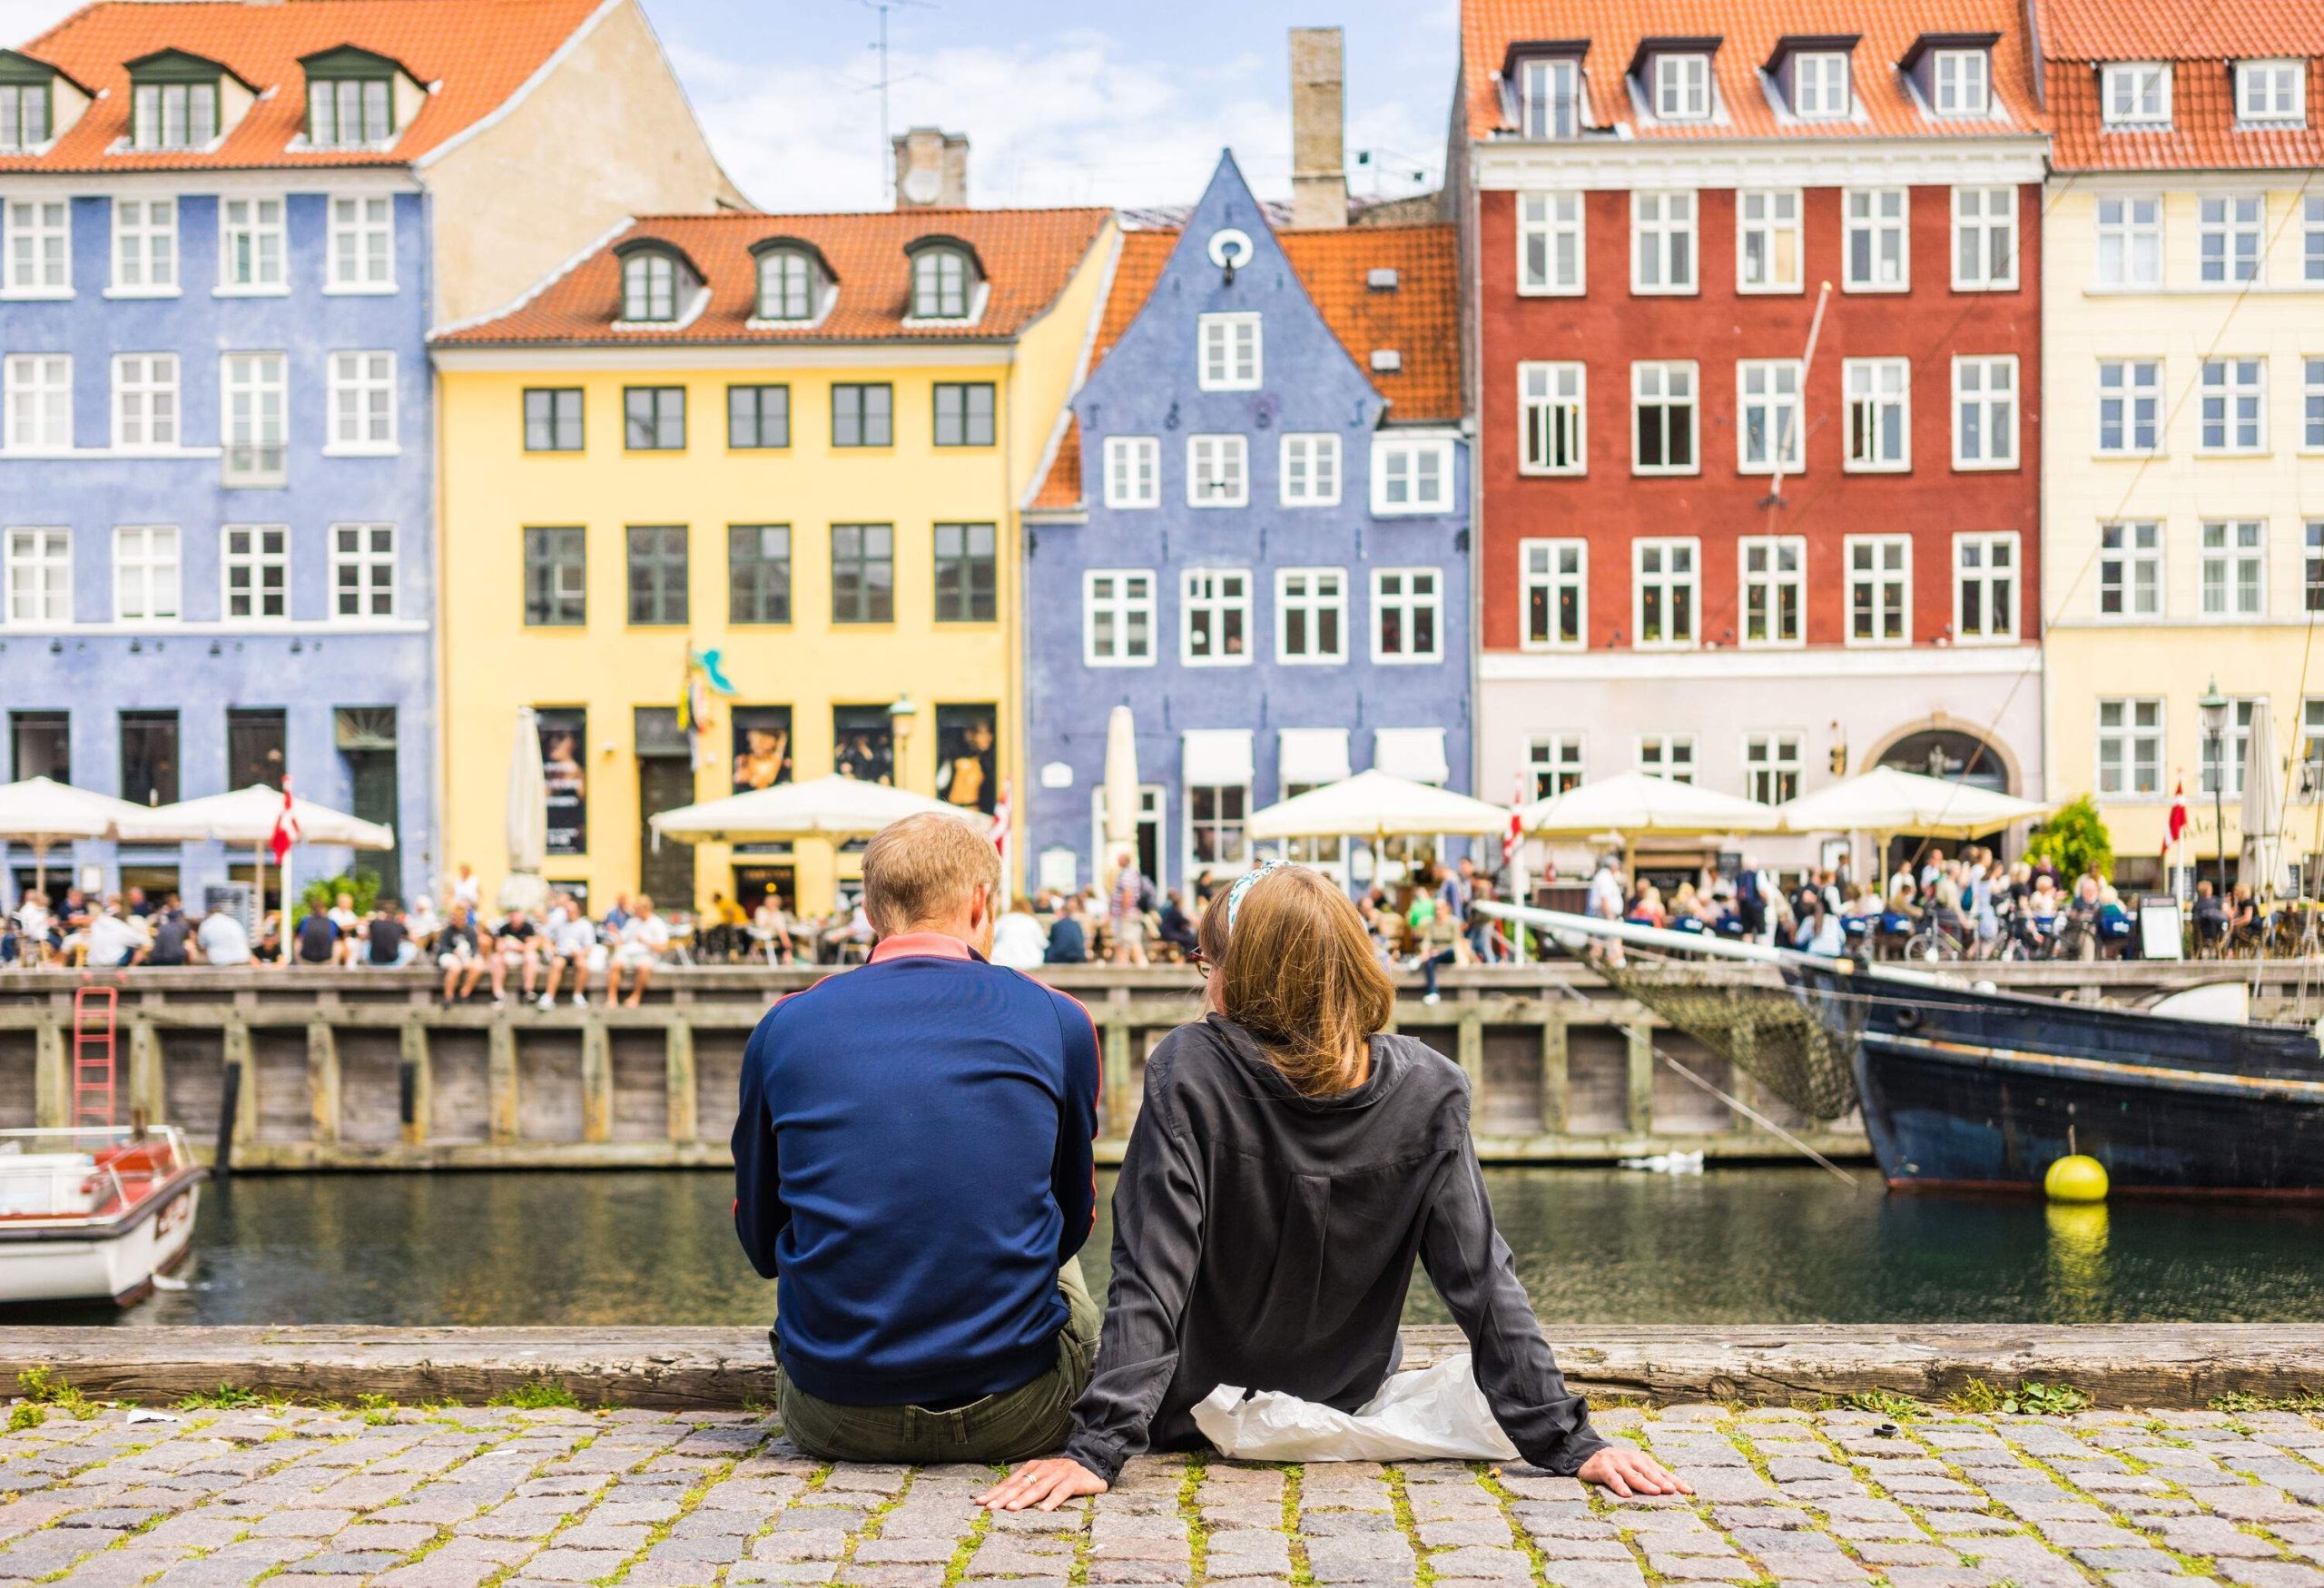 Two individuals sit on the promenade by the canal overlooking the pedestrians on the street lined with colourful and classic buildings.